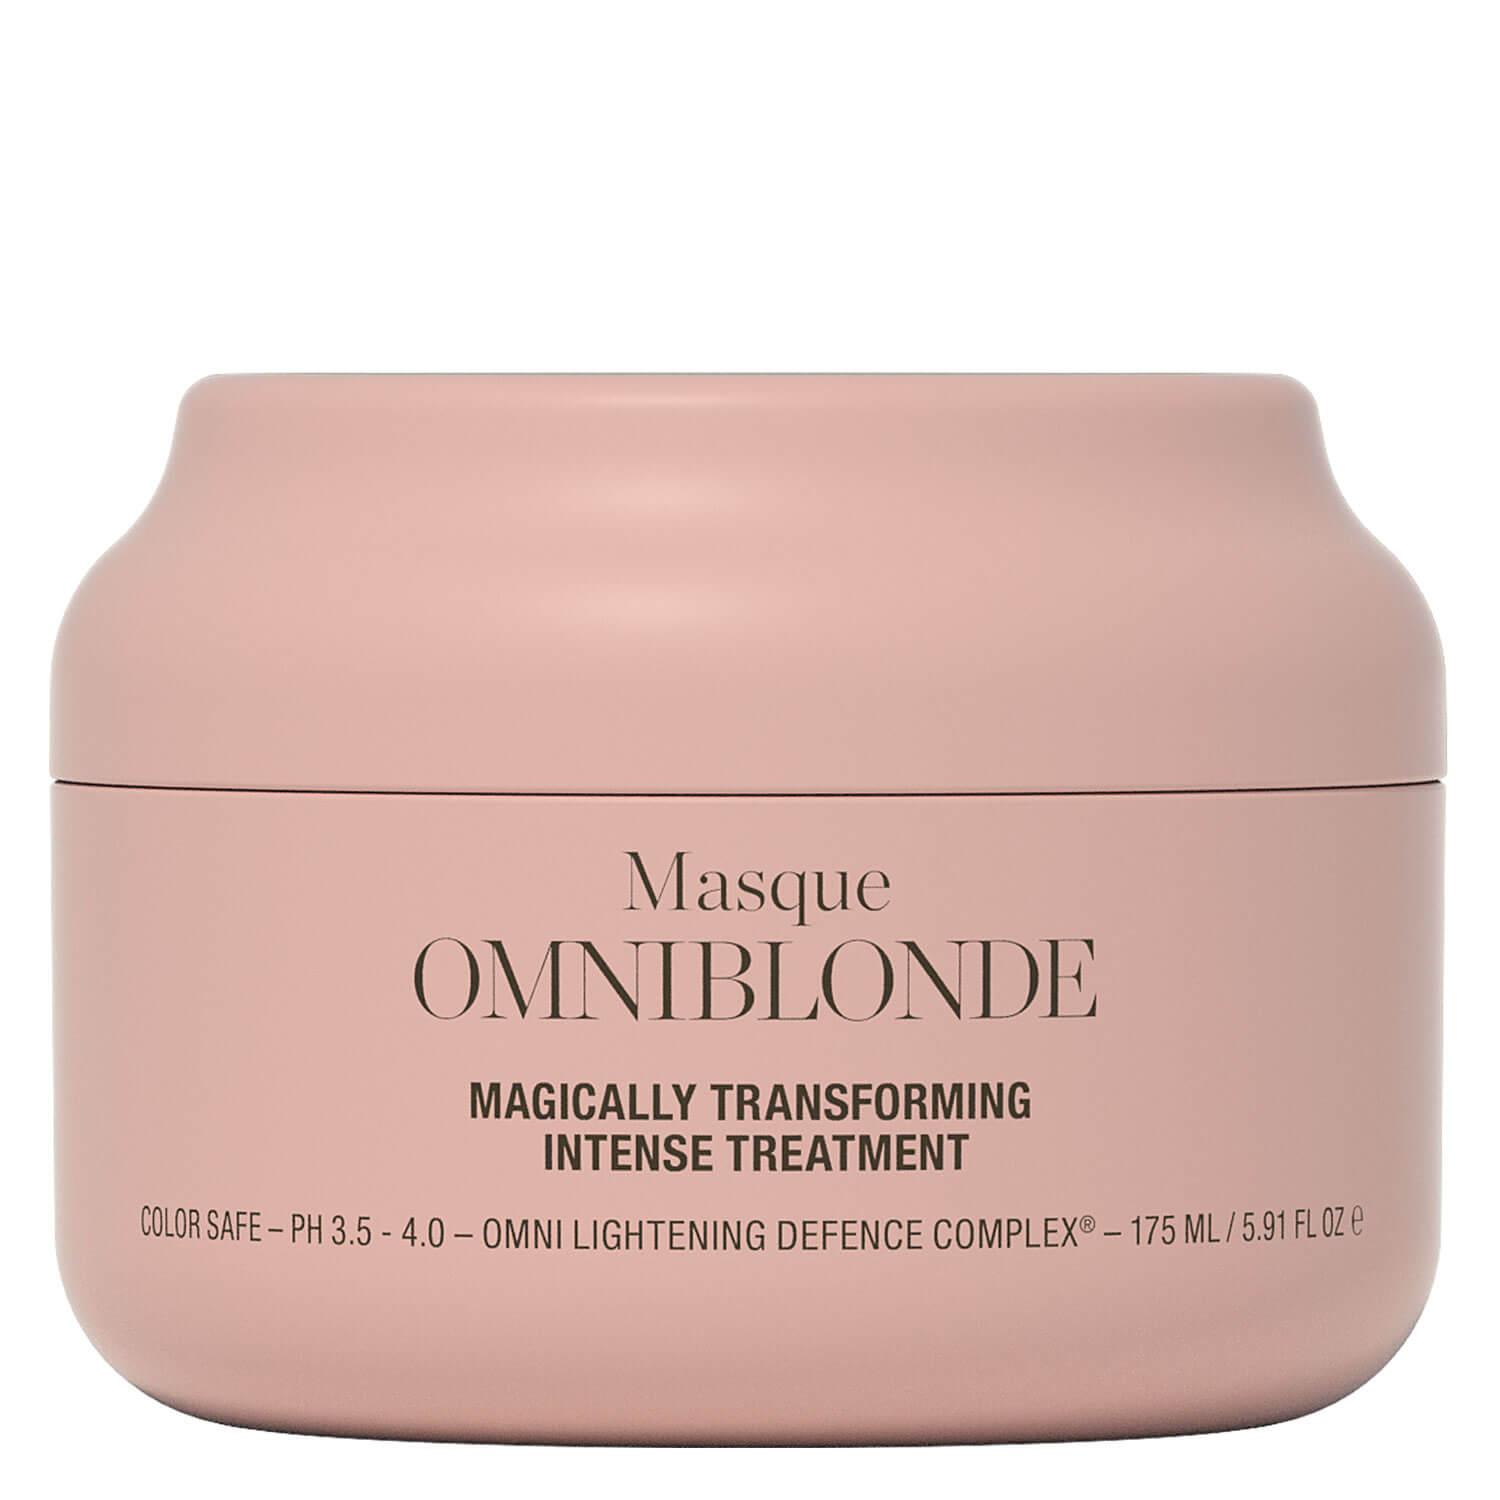 Omniblonde - Magically Transforming Intense Treatment